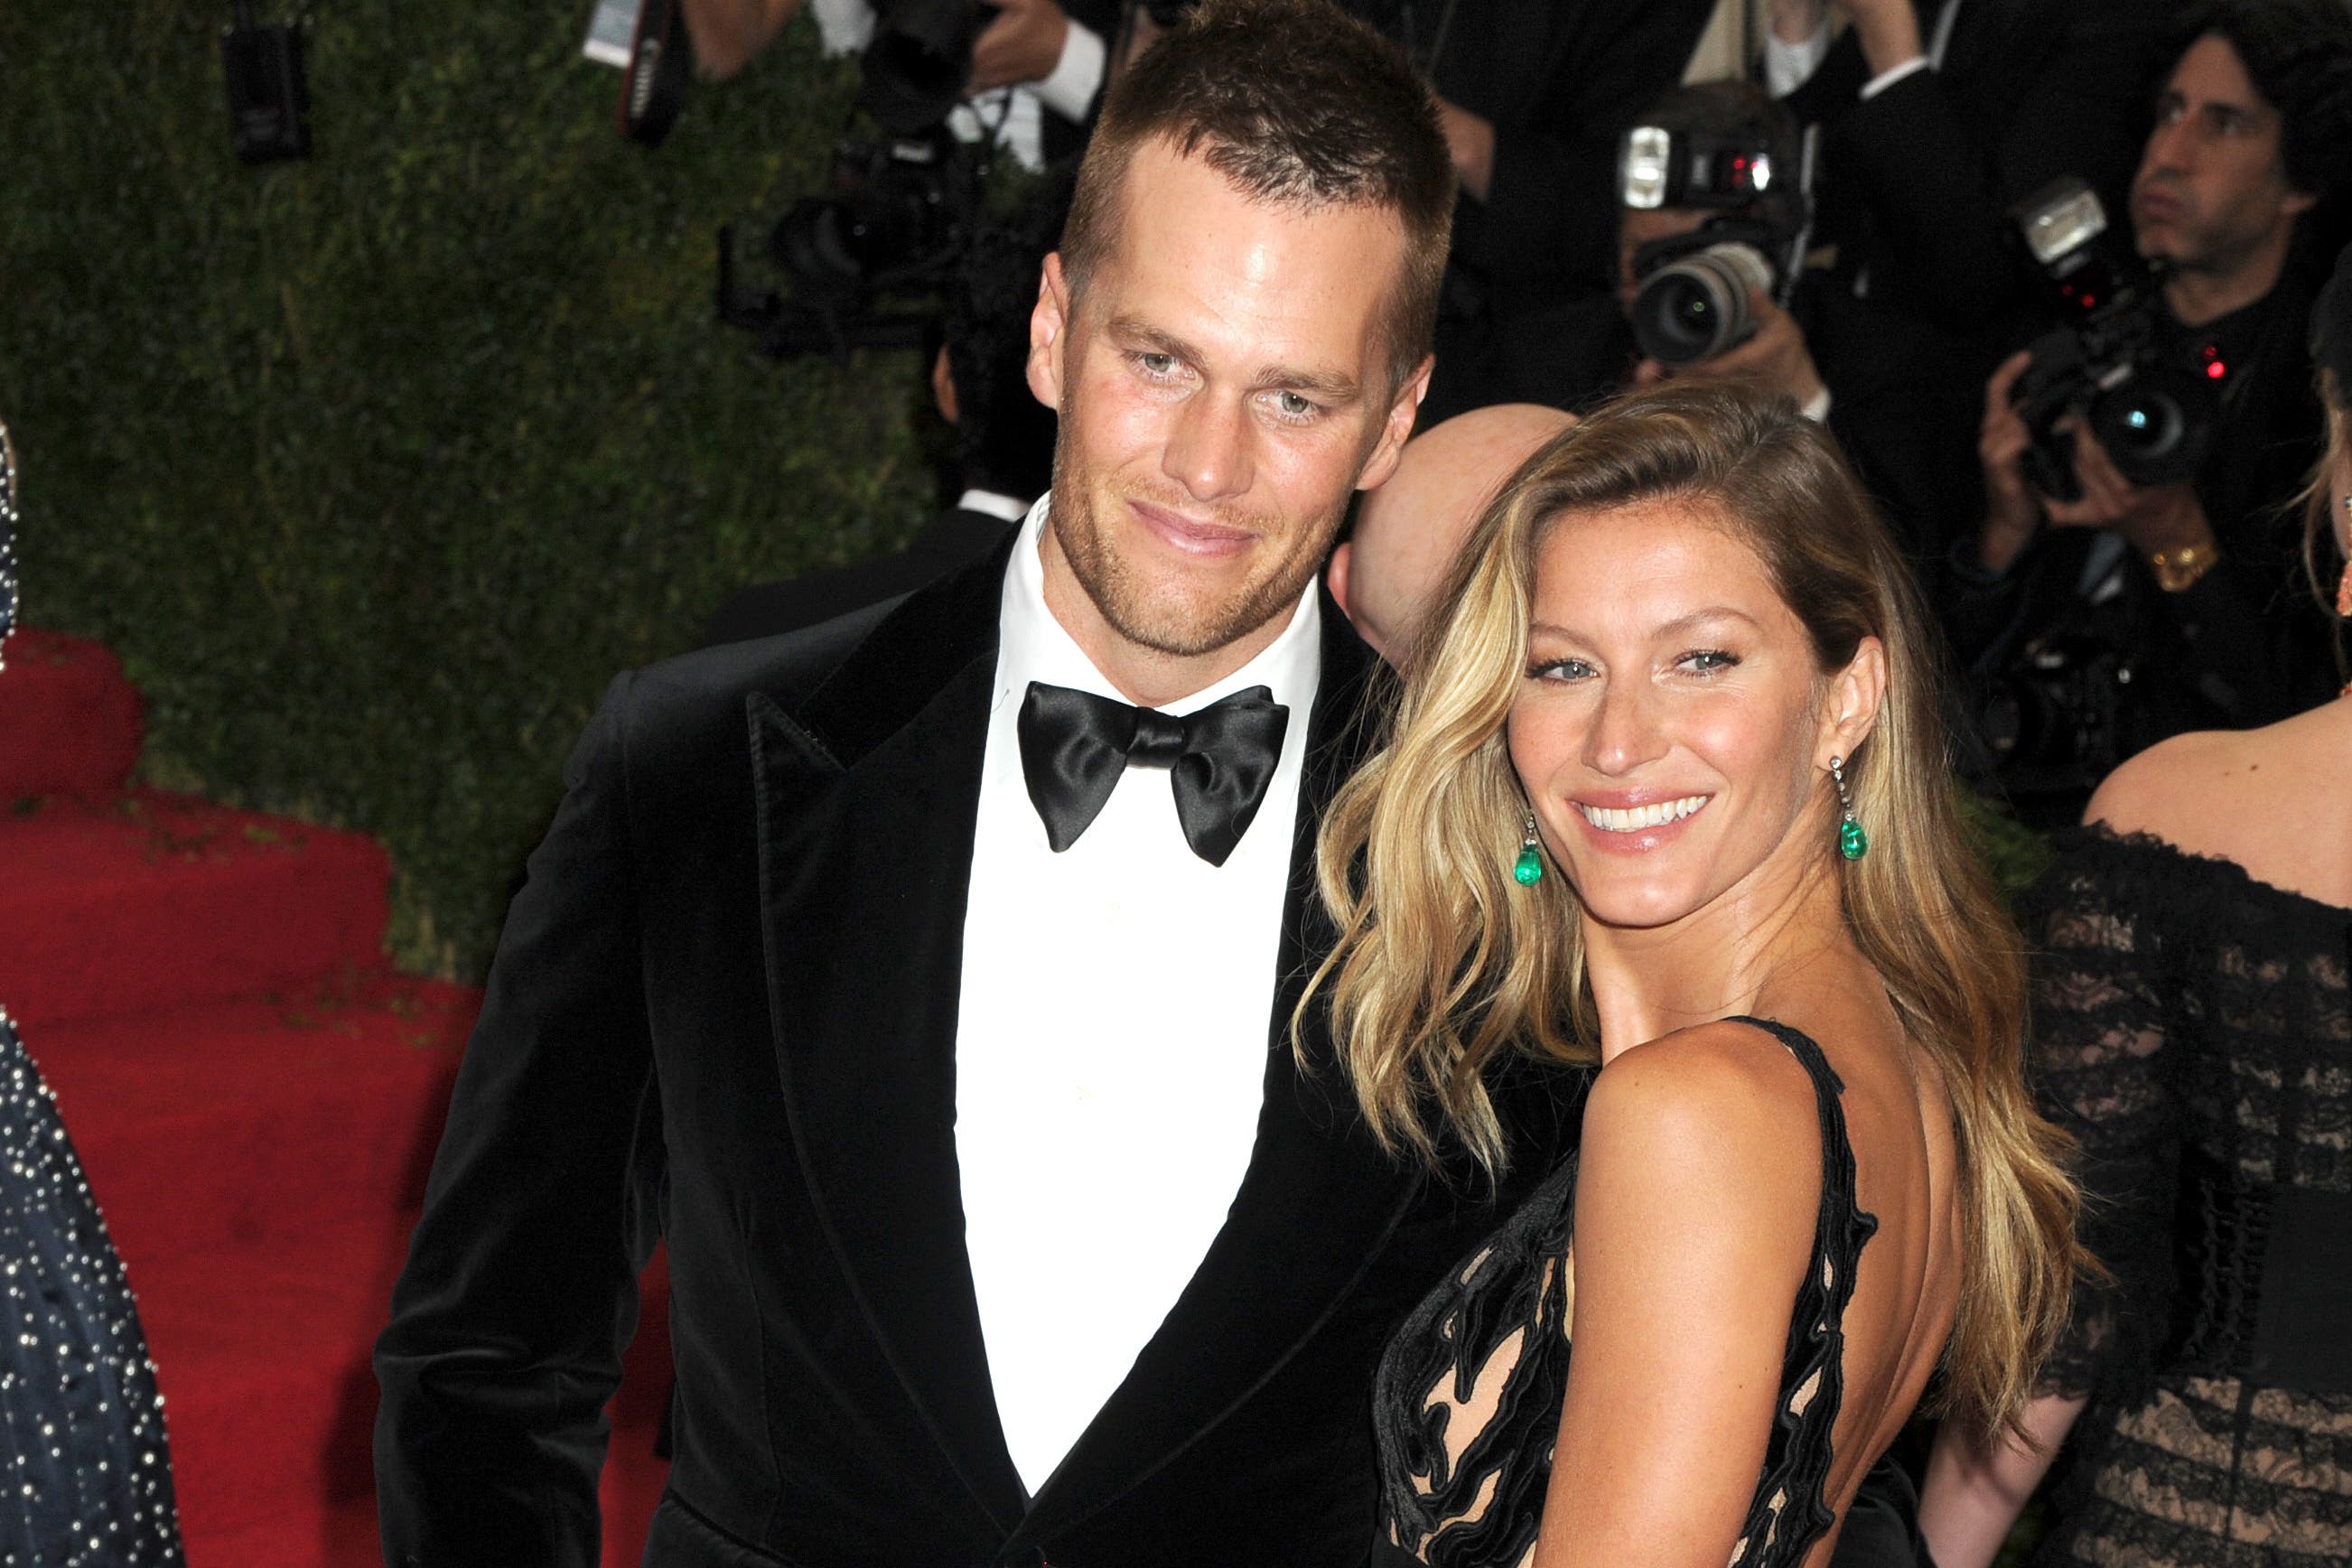 Tom Brady and Gisele Bundchen arriving at the Met Gala event at the Metropolitan Museum of Art in New York, USA (Dennis Van Tine/PA)